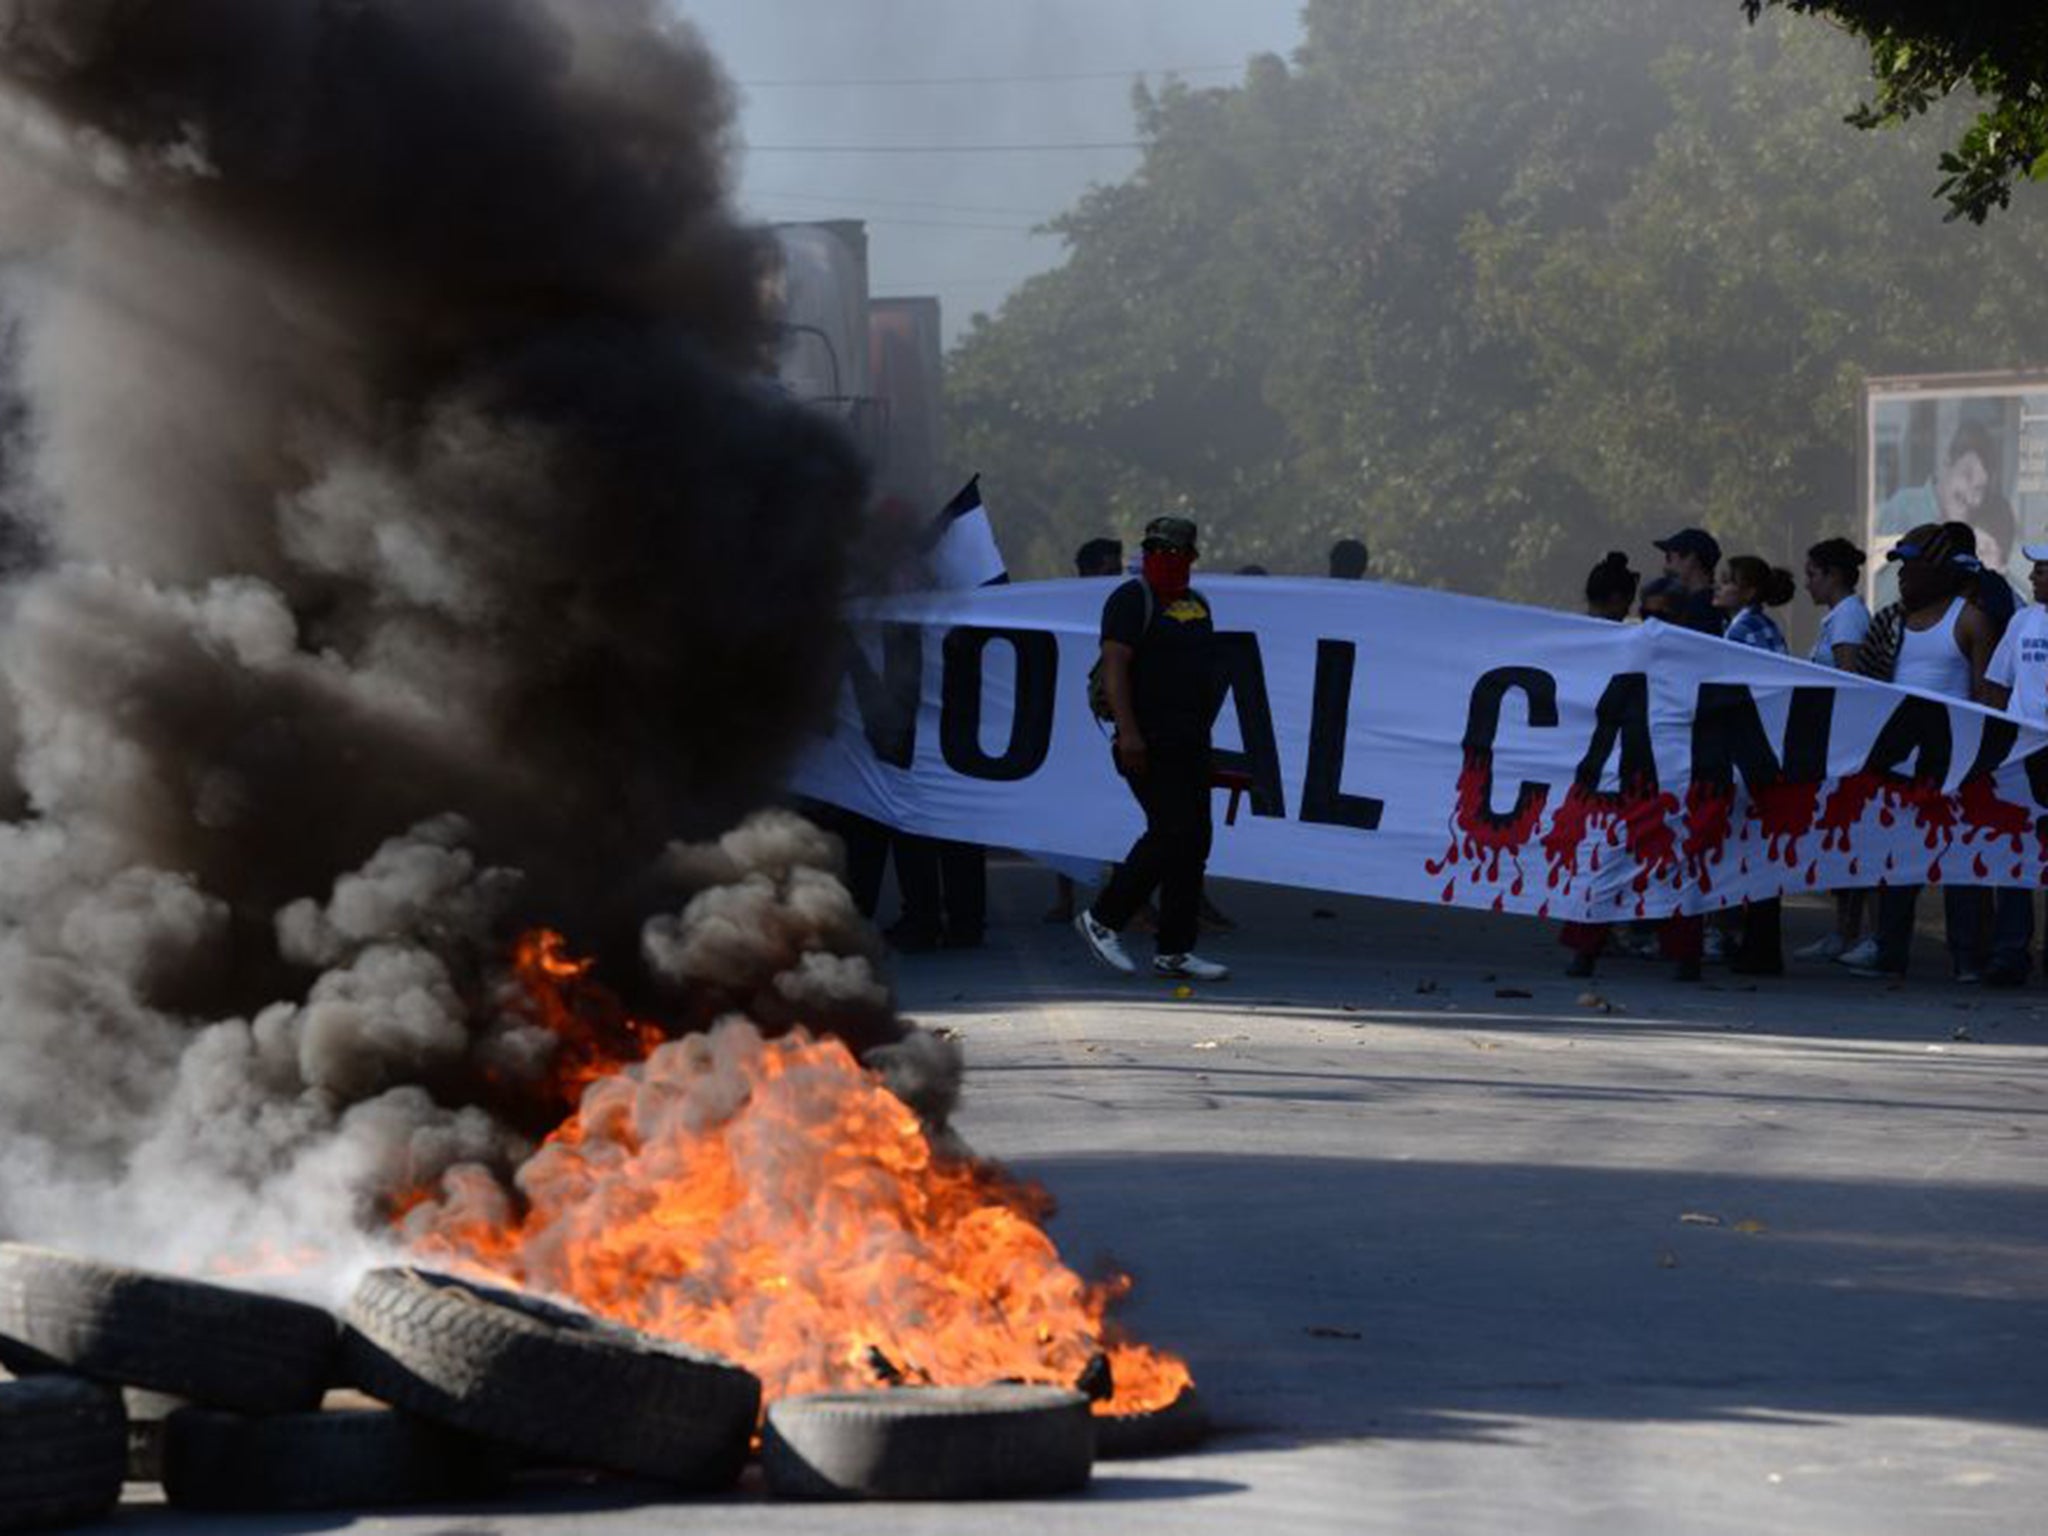 Protesters demonstrate against the building of a new canal in Nicaragua, in Rivas on Monday 